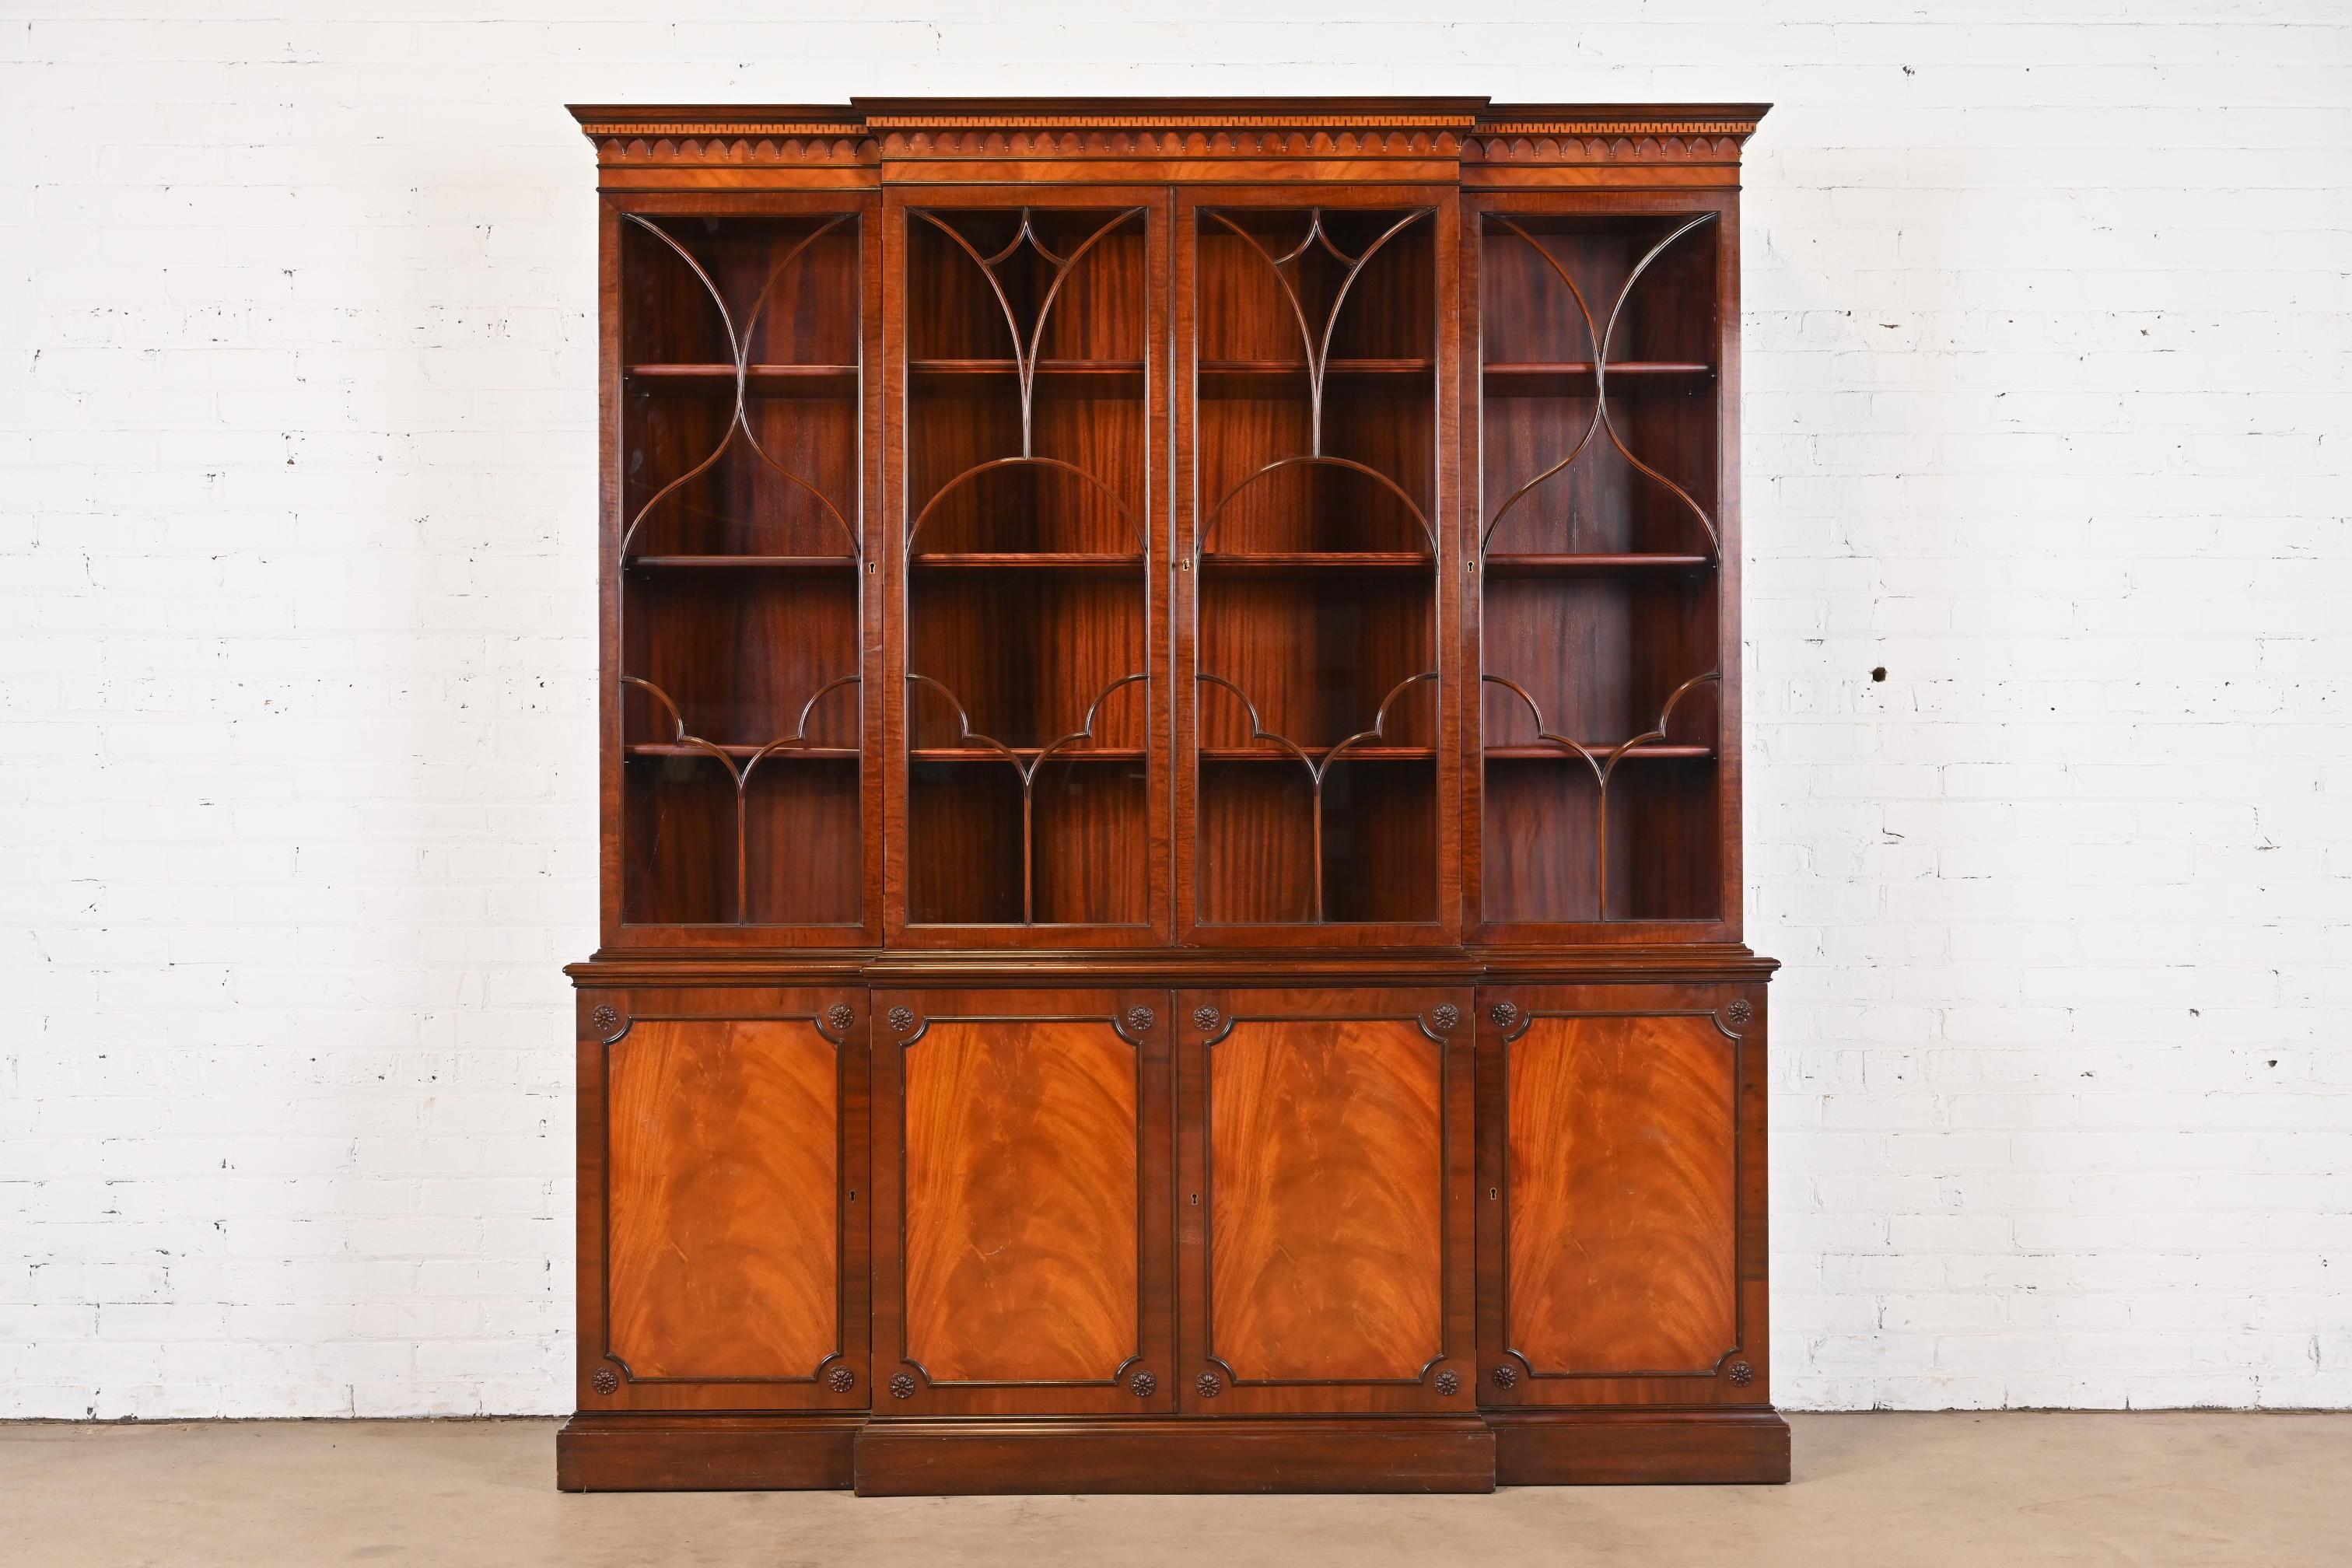 A gorgeous Georgian or Chippendale style breakfront bookcase or dining cabinet

By Schmieg & Kotzian

USA, Circa 1940s

Carved mahogany, with mullioned glass front doors, and brass hardware.

Measures: 72.75